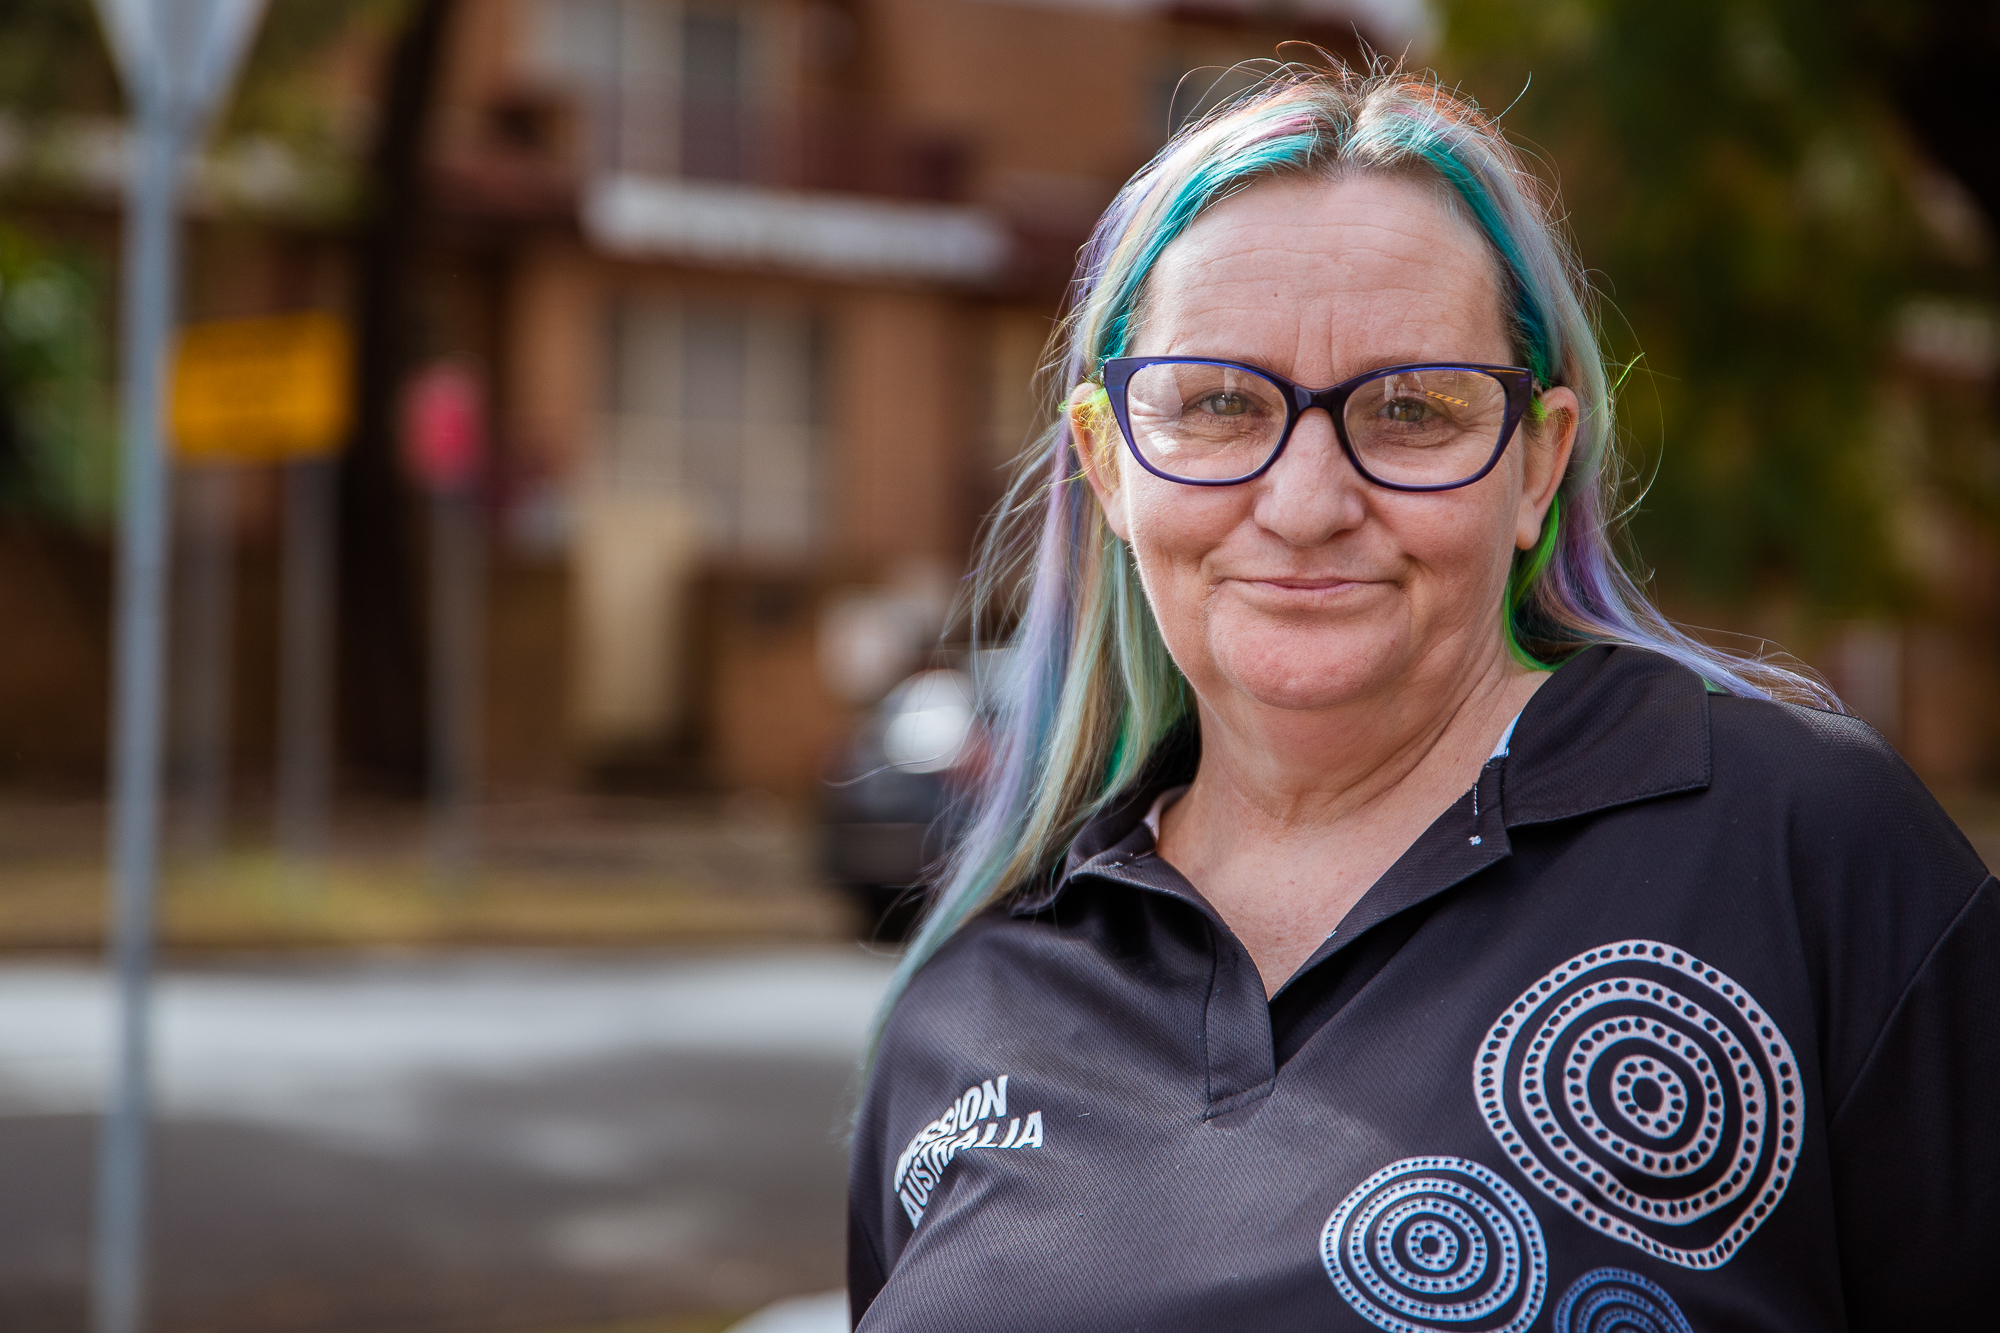 Kassie Paice standing outside in front of houses, with colourful hair and wearing a Mission Australia shirt.